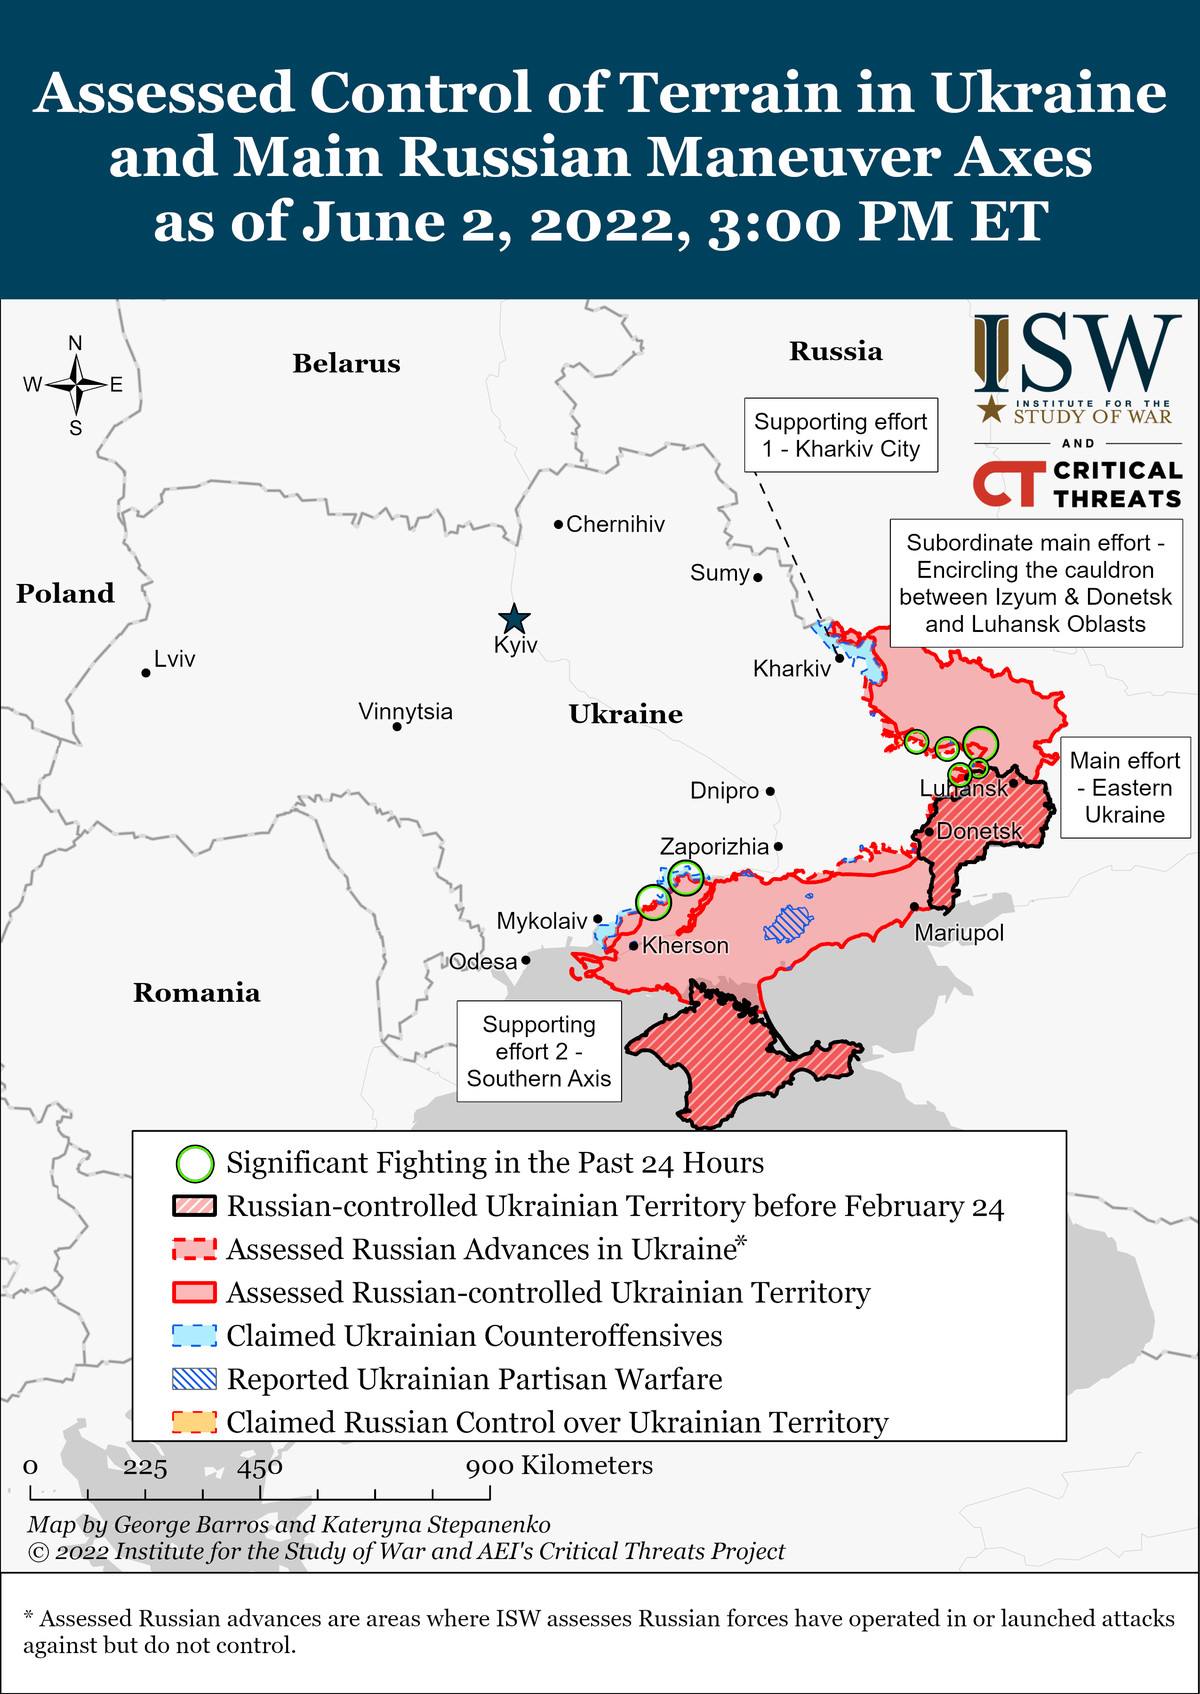 100 days in, Russia’s war is now a brutal offensive in eastern Ukraine